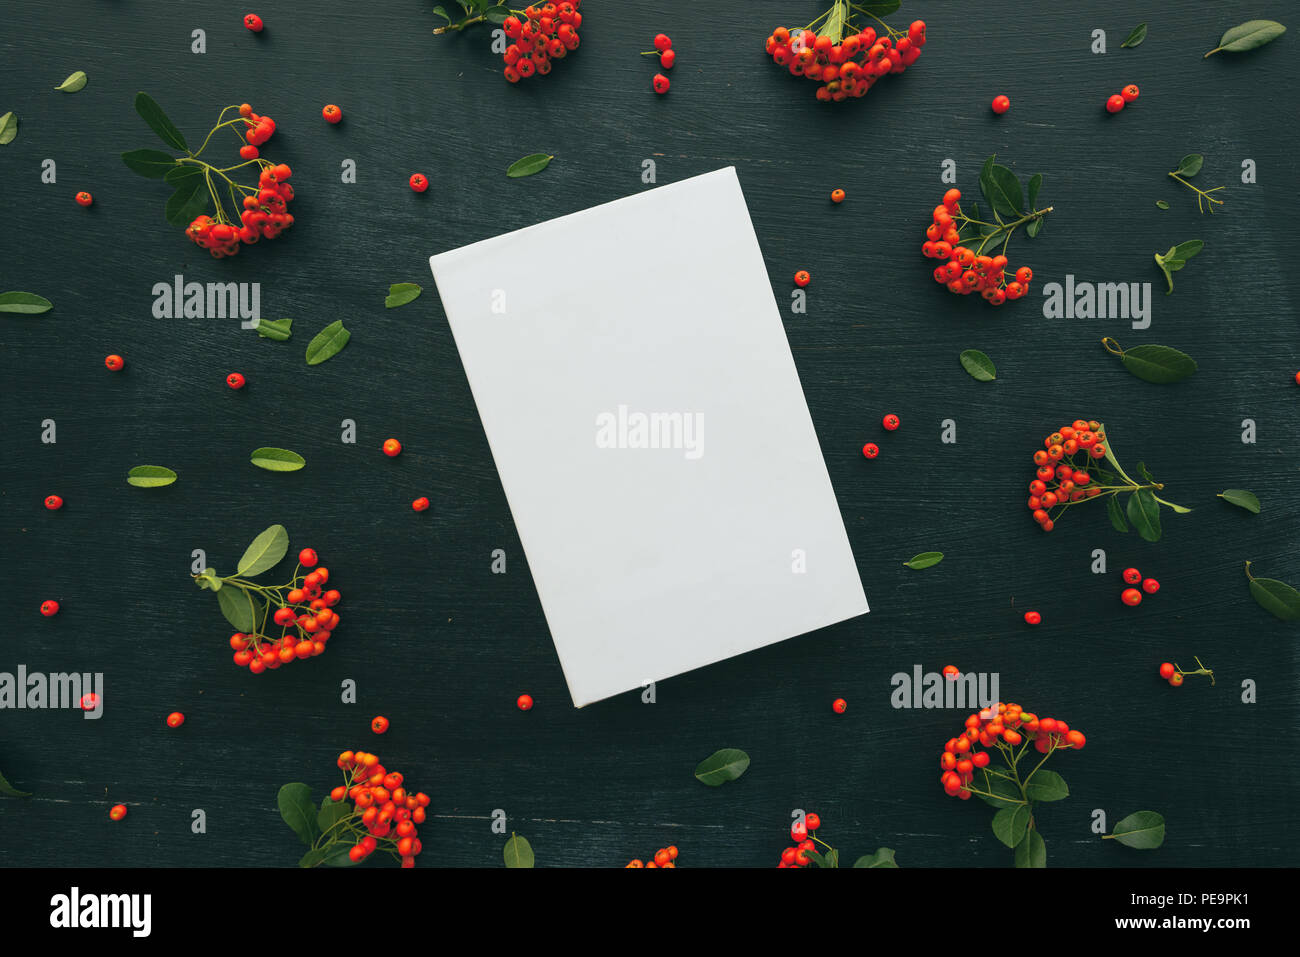 Hardcover book cover design mock up top view overhead shot with floral arrangement, retro toned flat lay minimalism Stock Photo